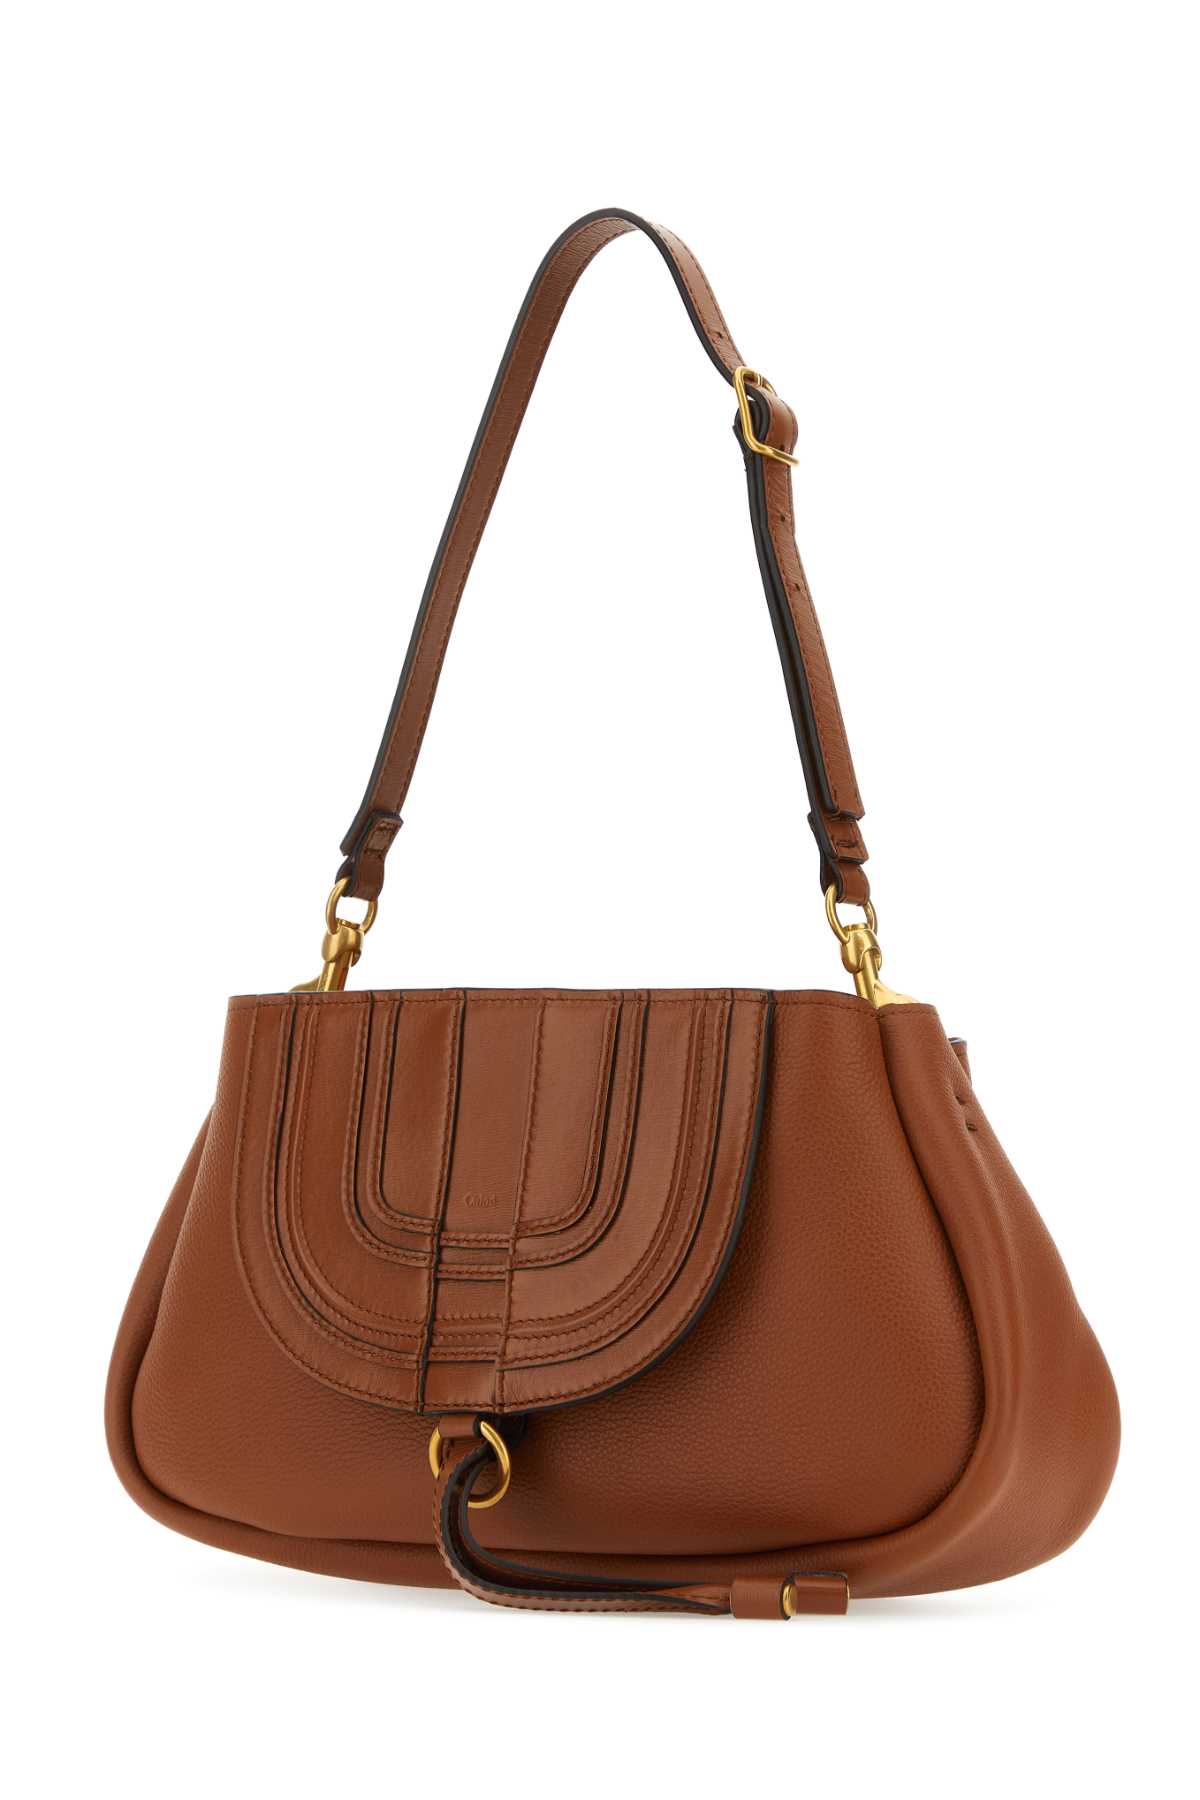 Chloé Brown Leather Marcie Clutch In Tan